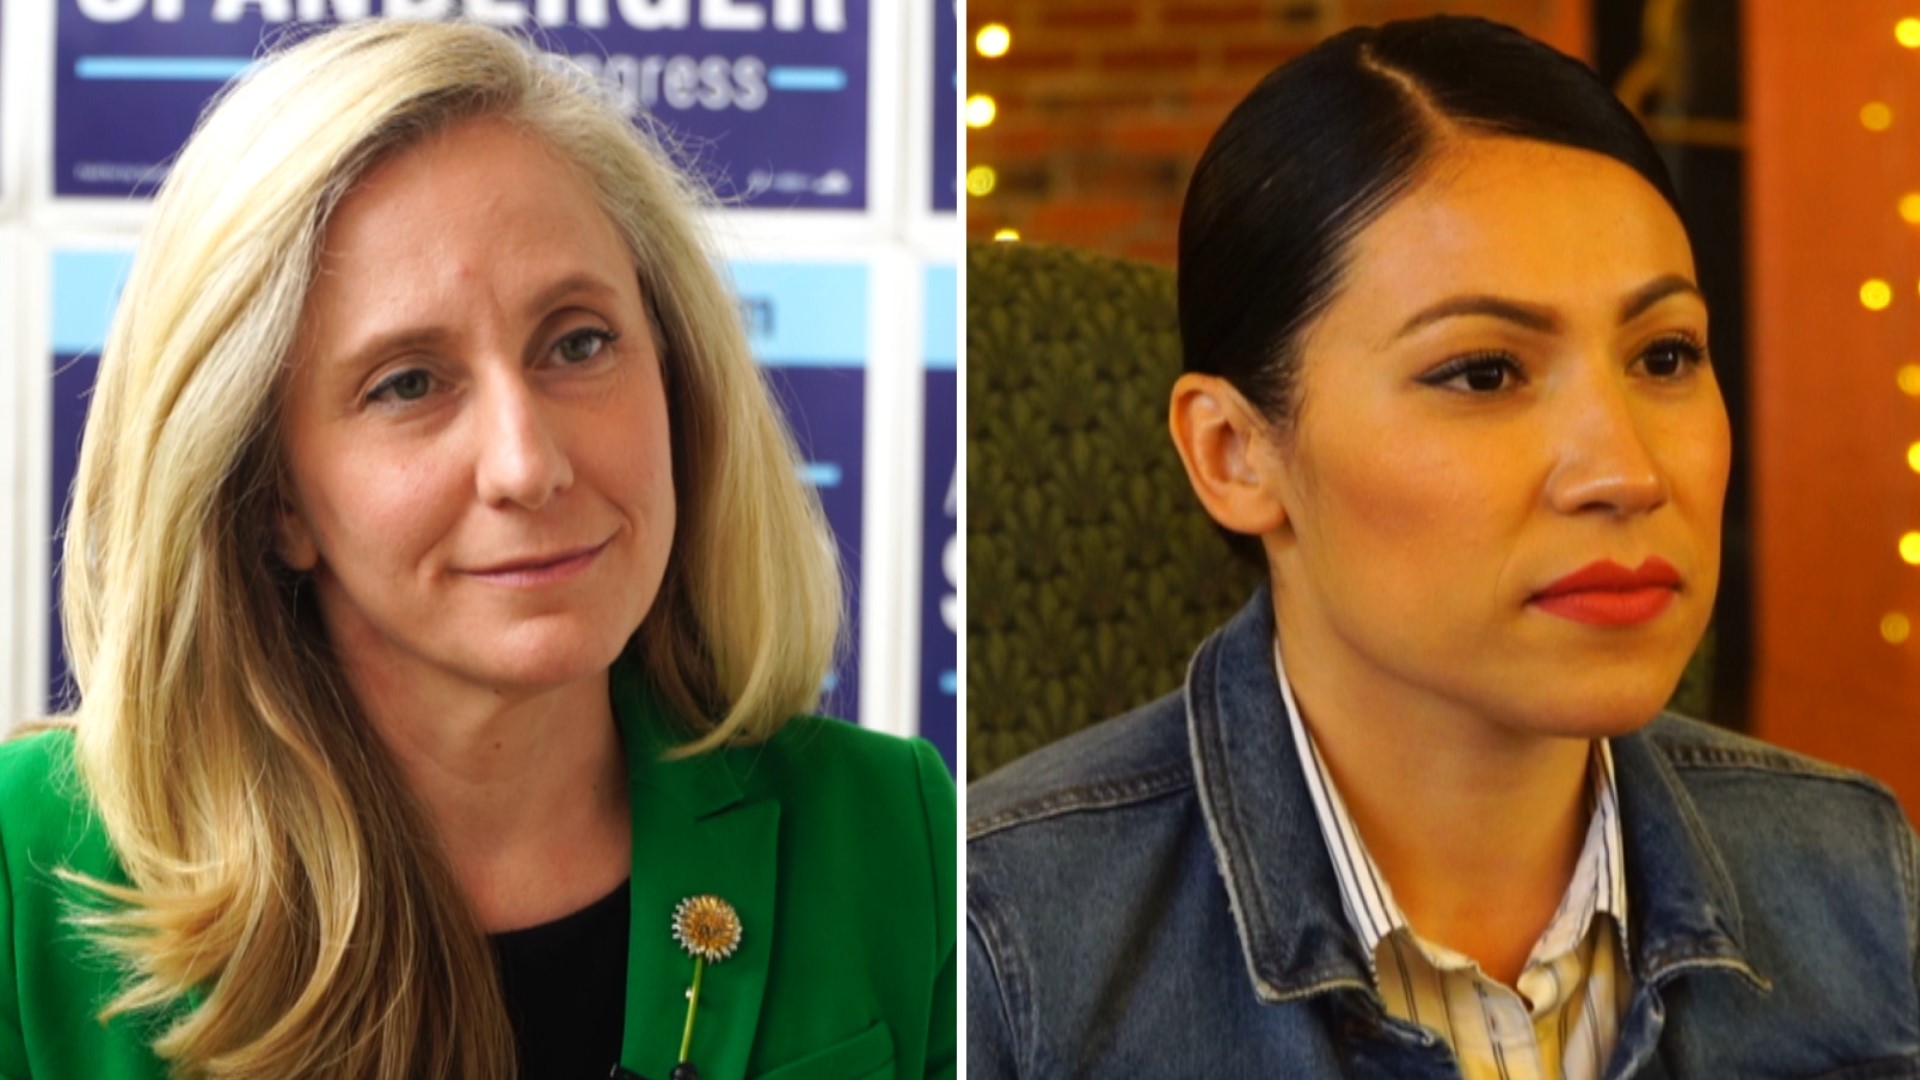 The battle for the 7th Congressional District seat in Virginia is a closely watched race that could help determine who controls the U.S. House.